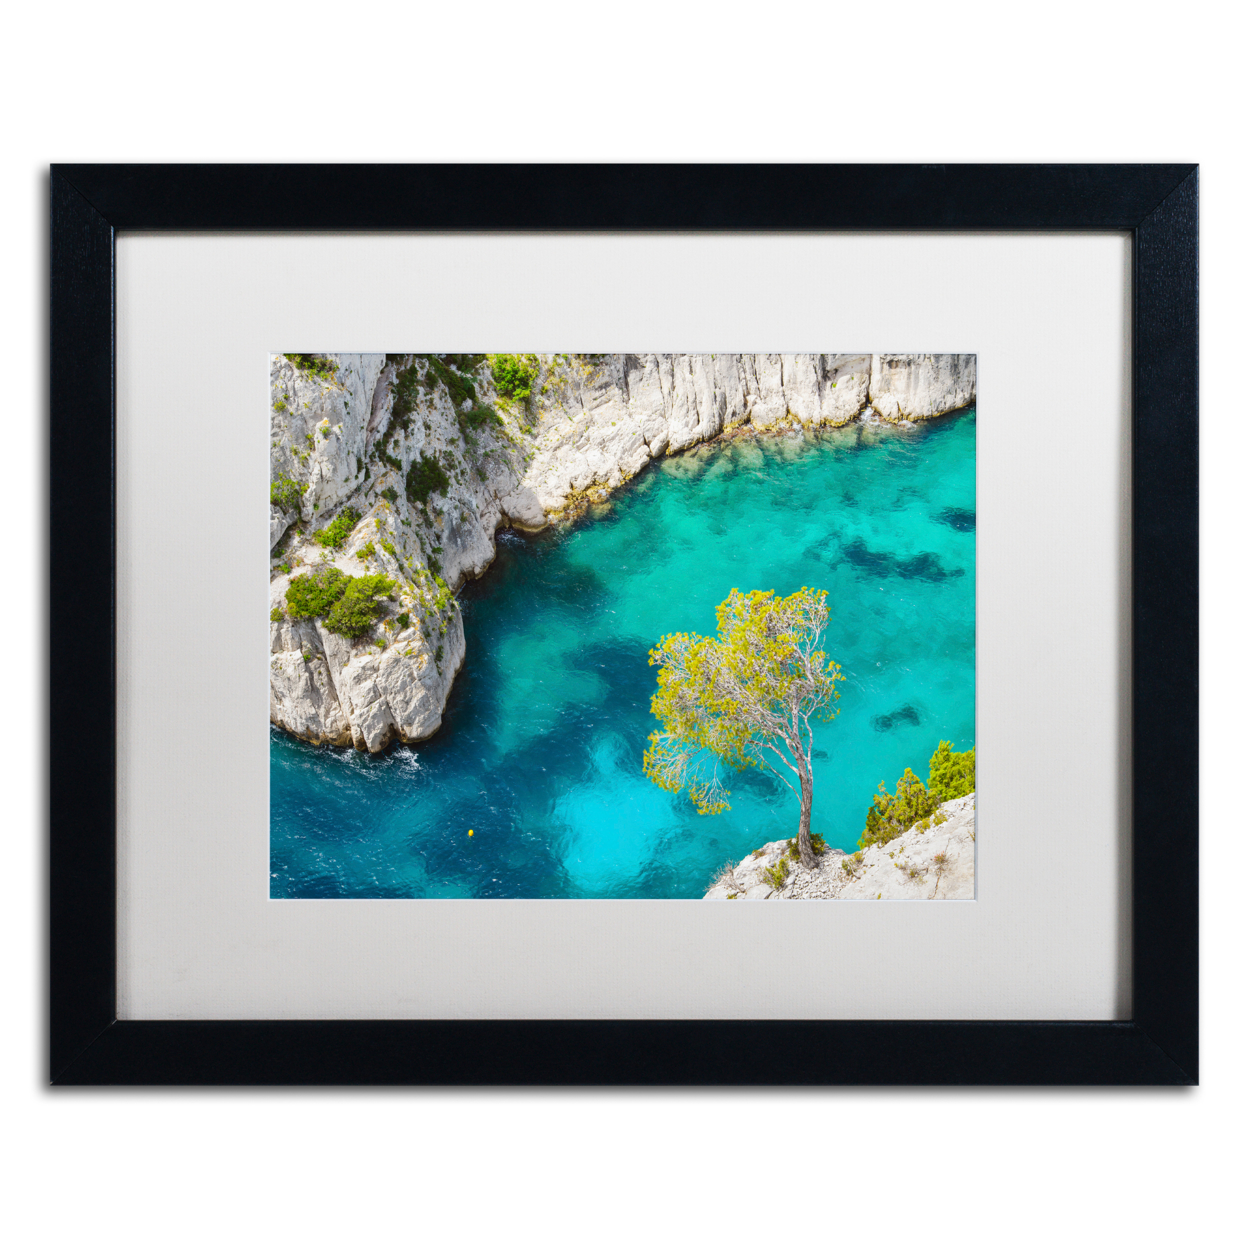 Michael Blanchette Photography 'Turquoise Waters' Black Wooden Framed Art 18 X 22 Inches